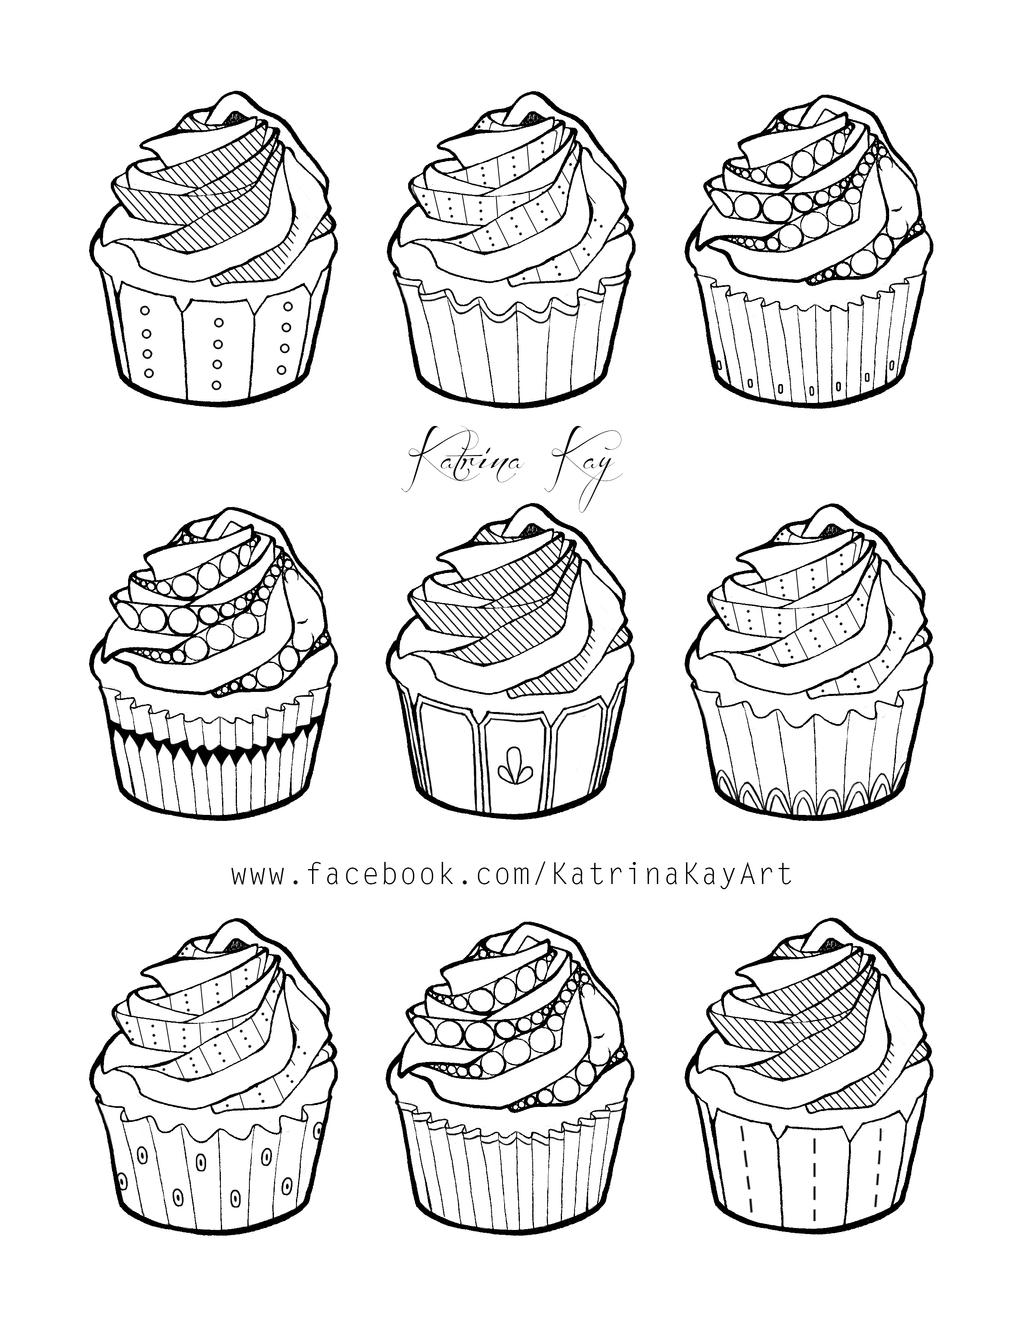 Adult Coloring Book Page - Cupcakes